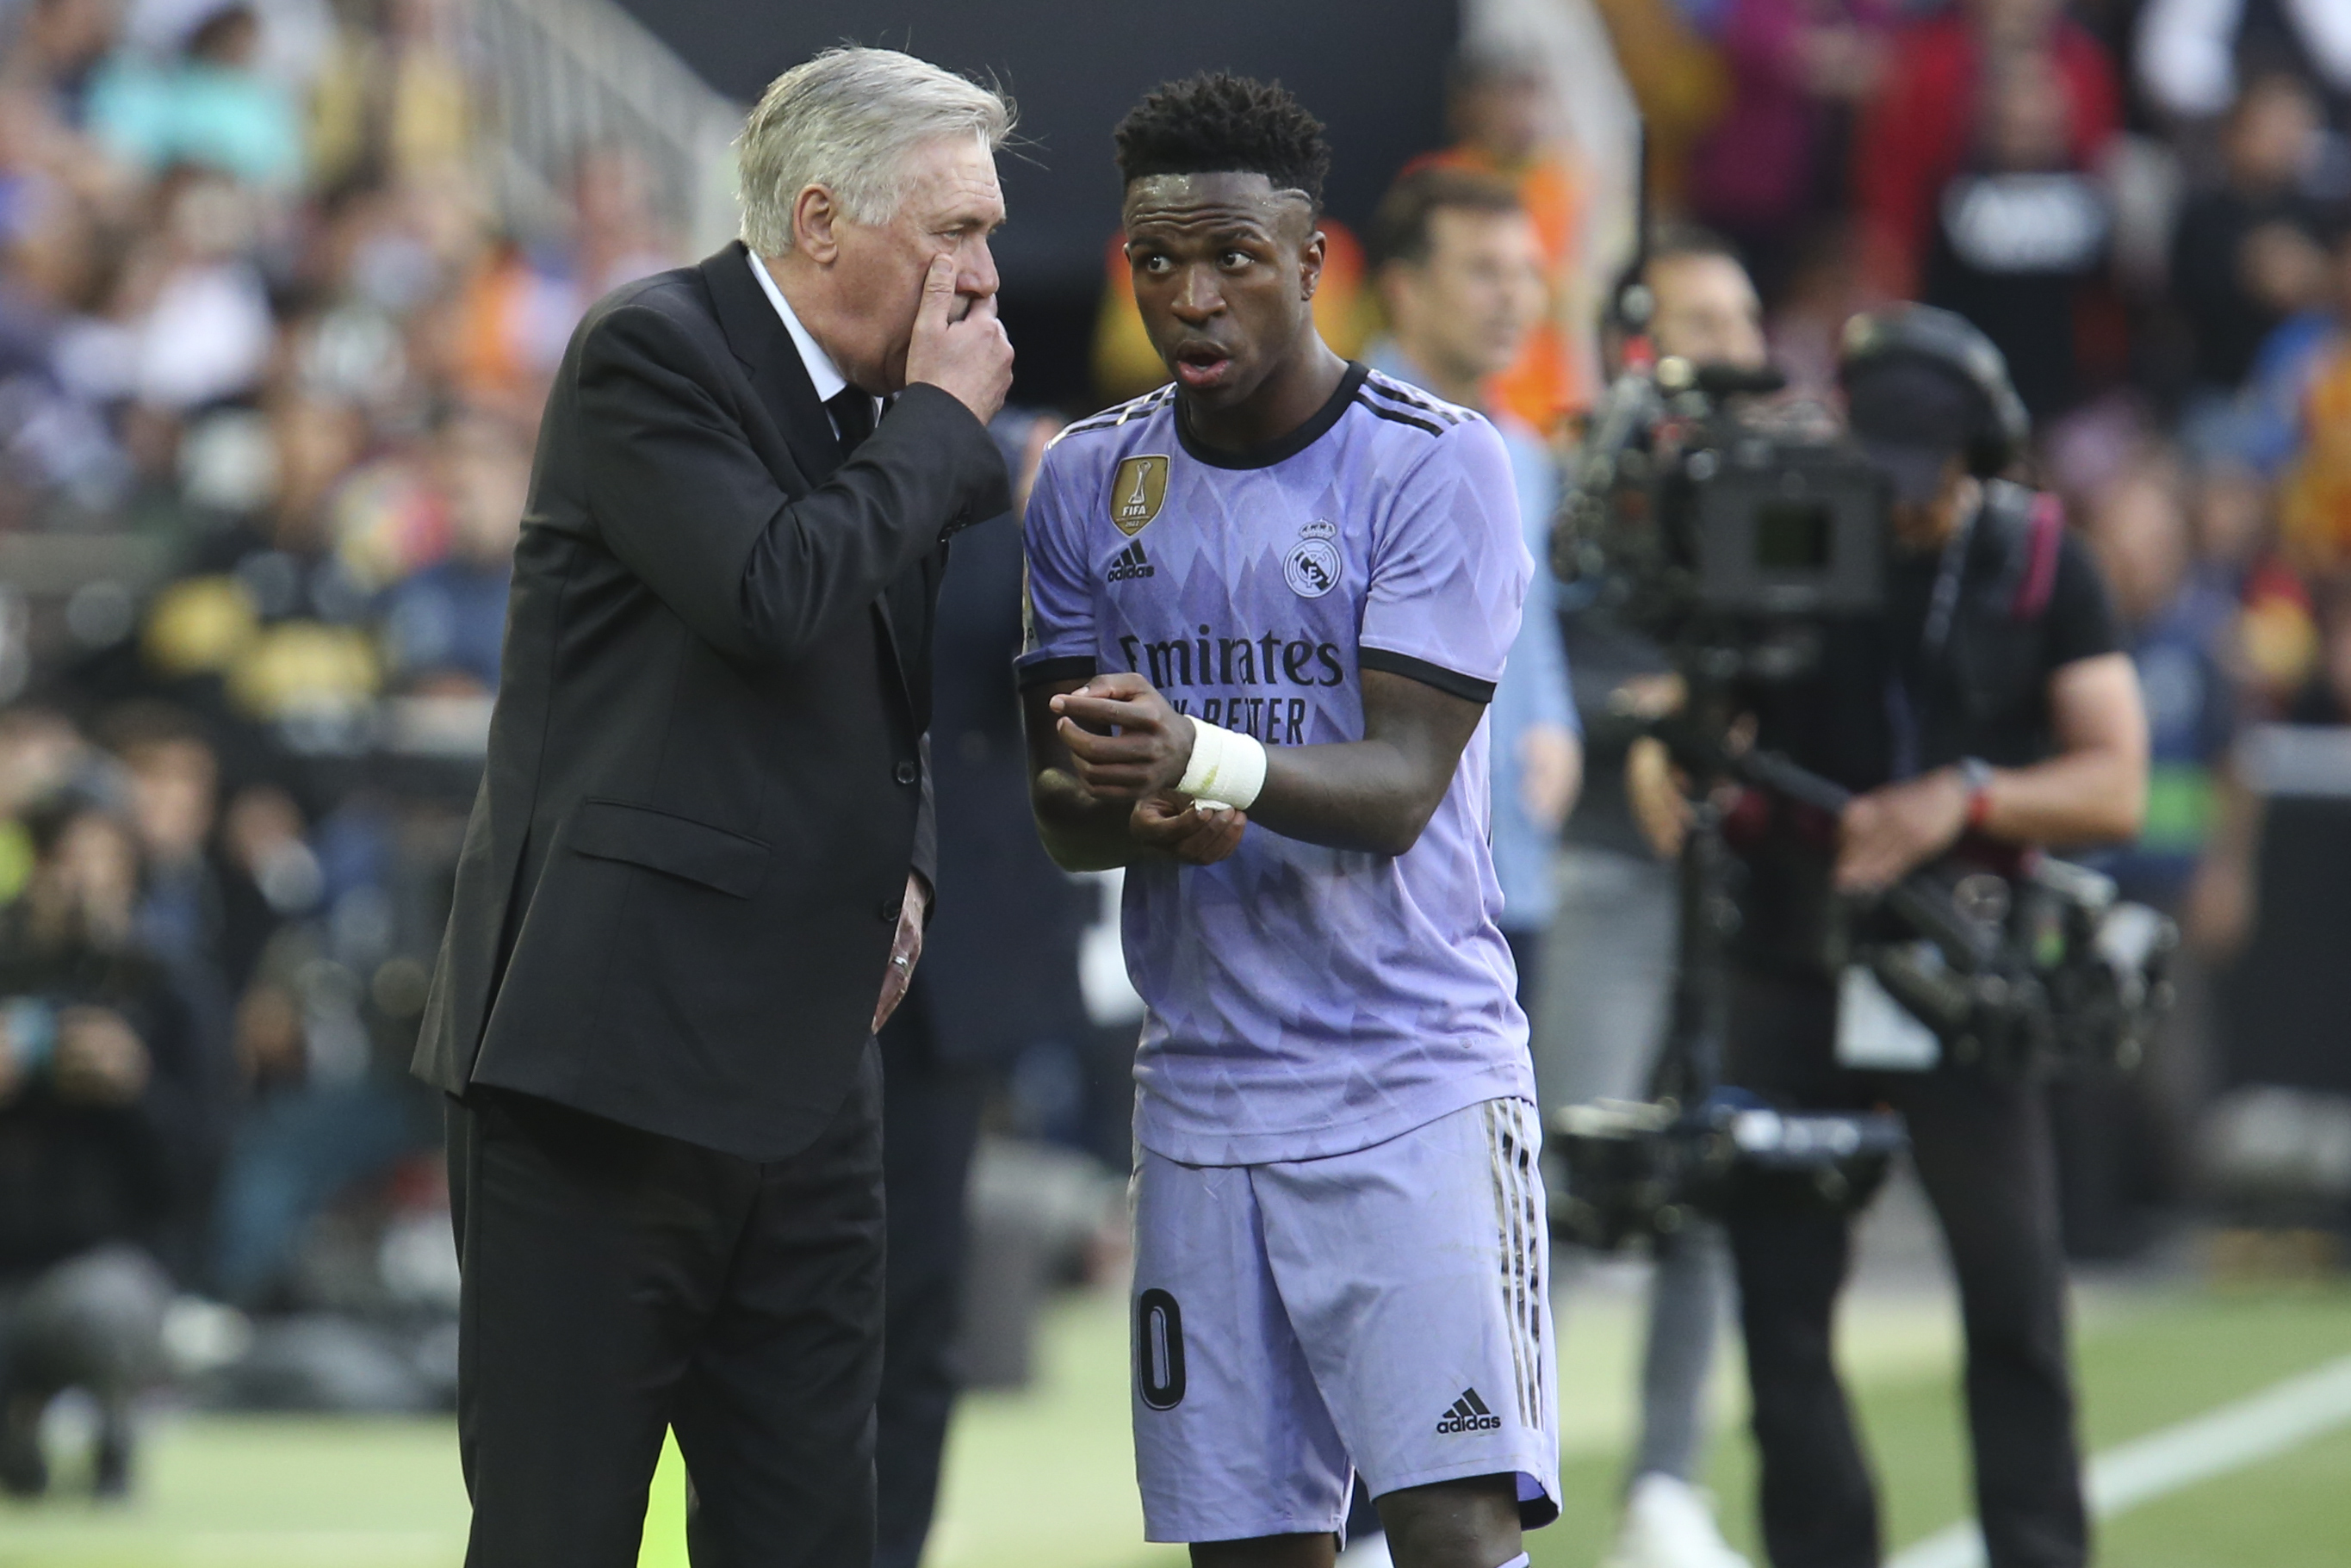 Ancelotti talks with Vinicius during the match.